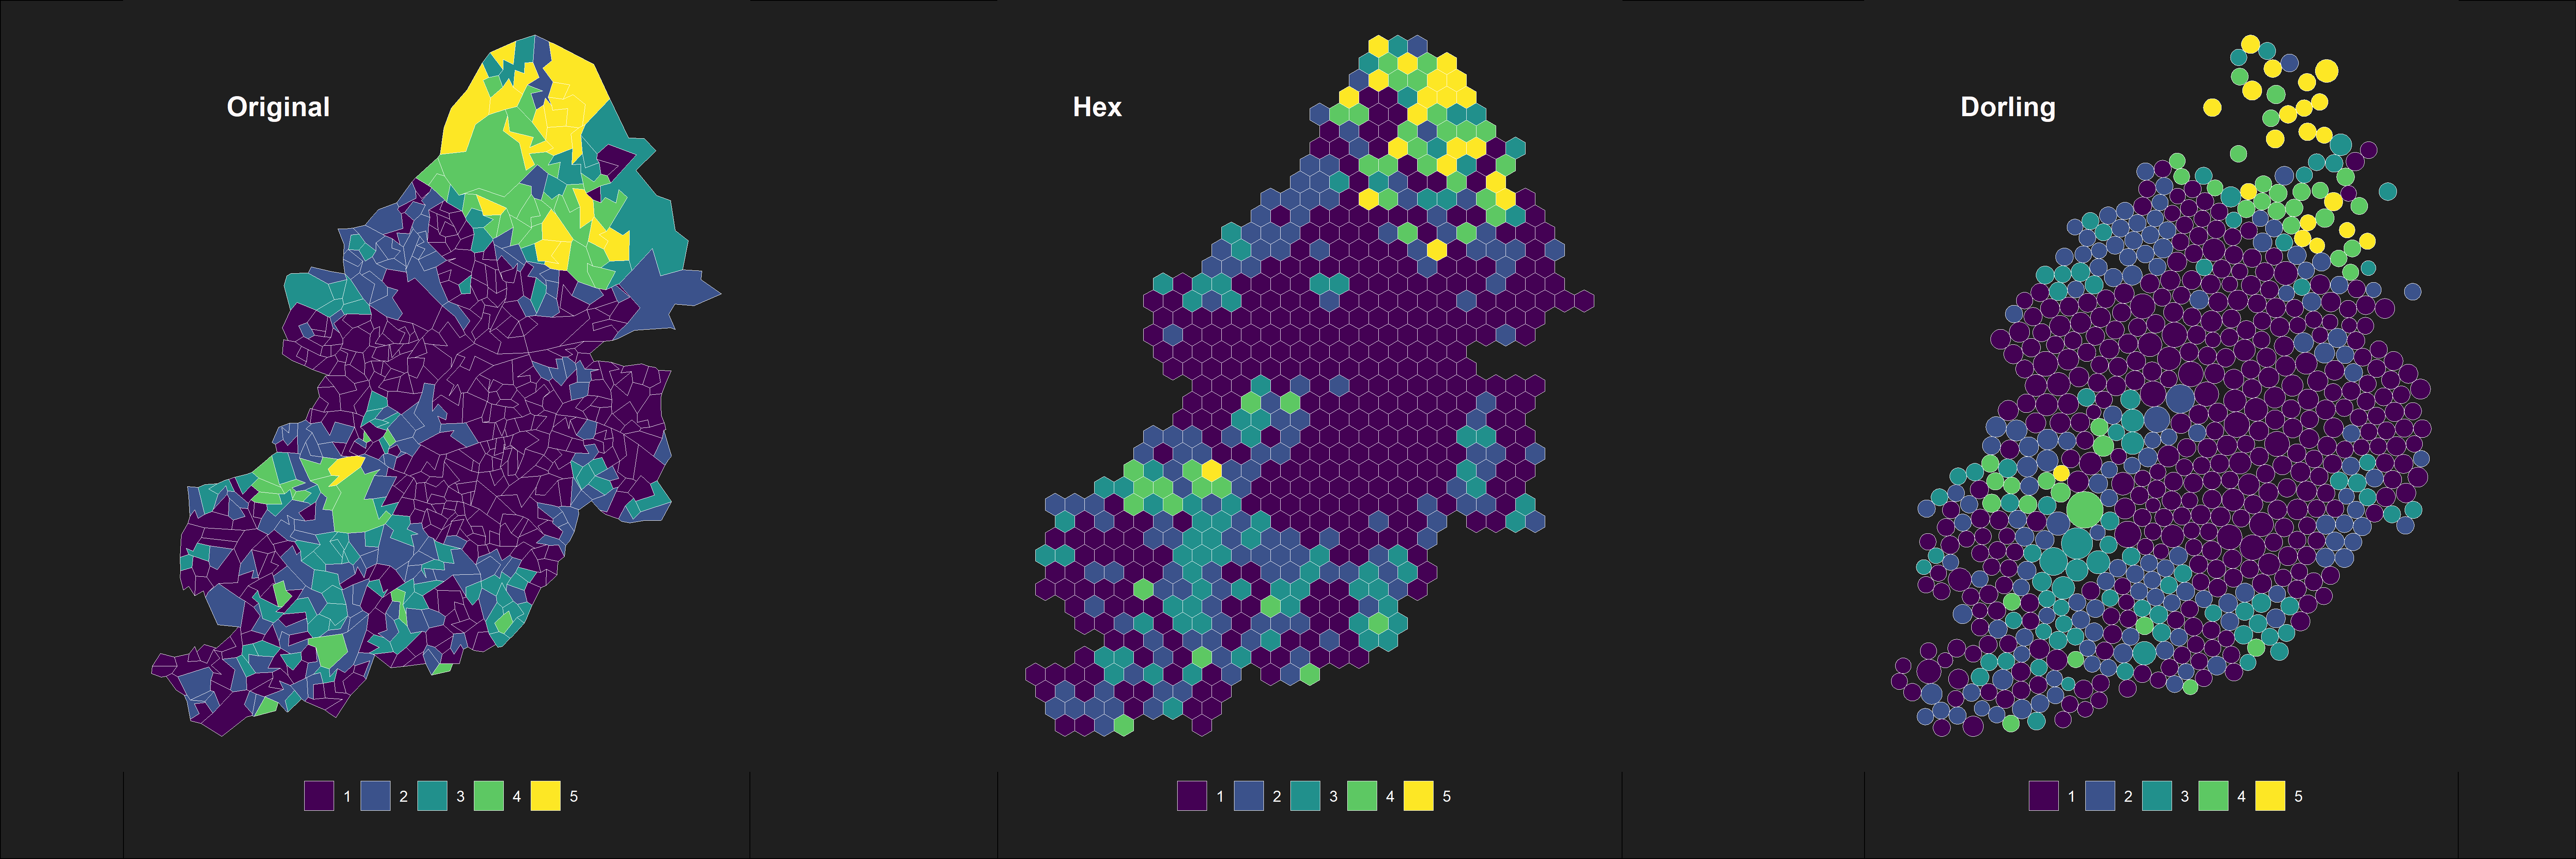 Three maps of neighbourhood deprivation in Birmingham, each visualised using different methods, namely, the original boundaries, a hex grid and a dorling cartogram.